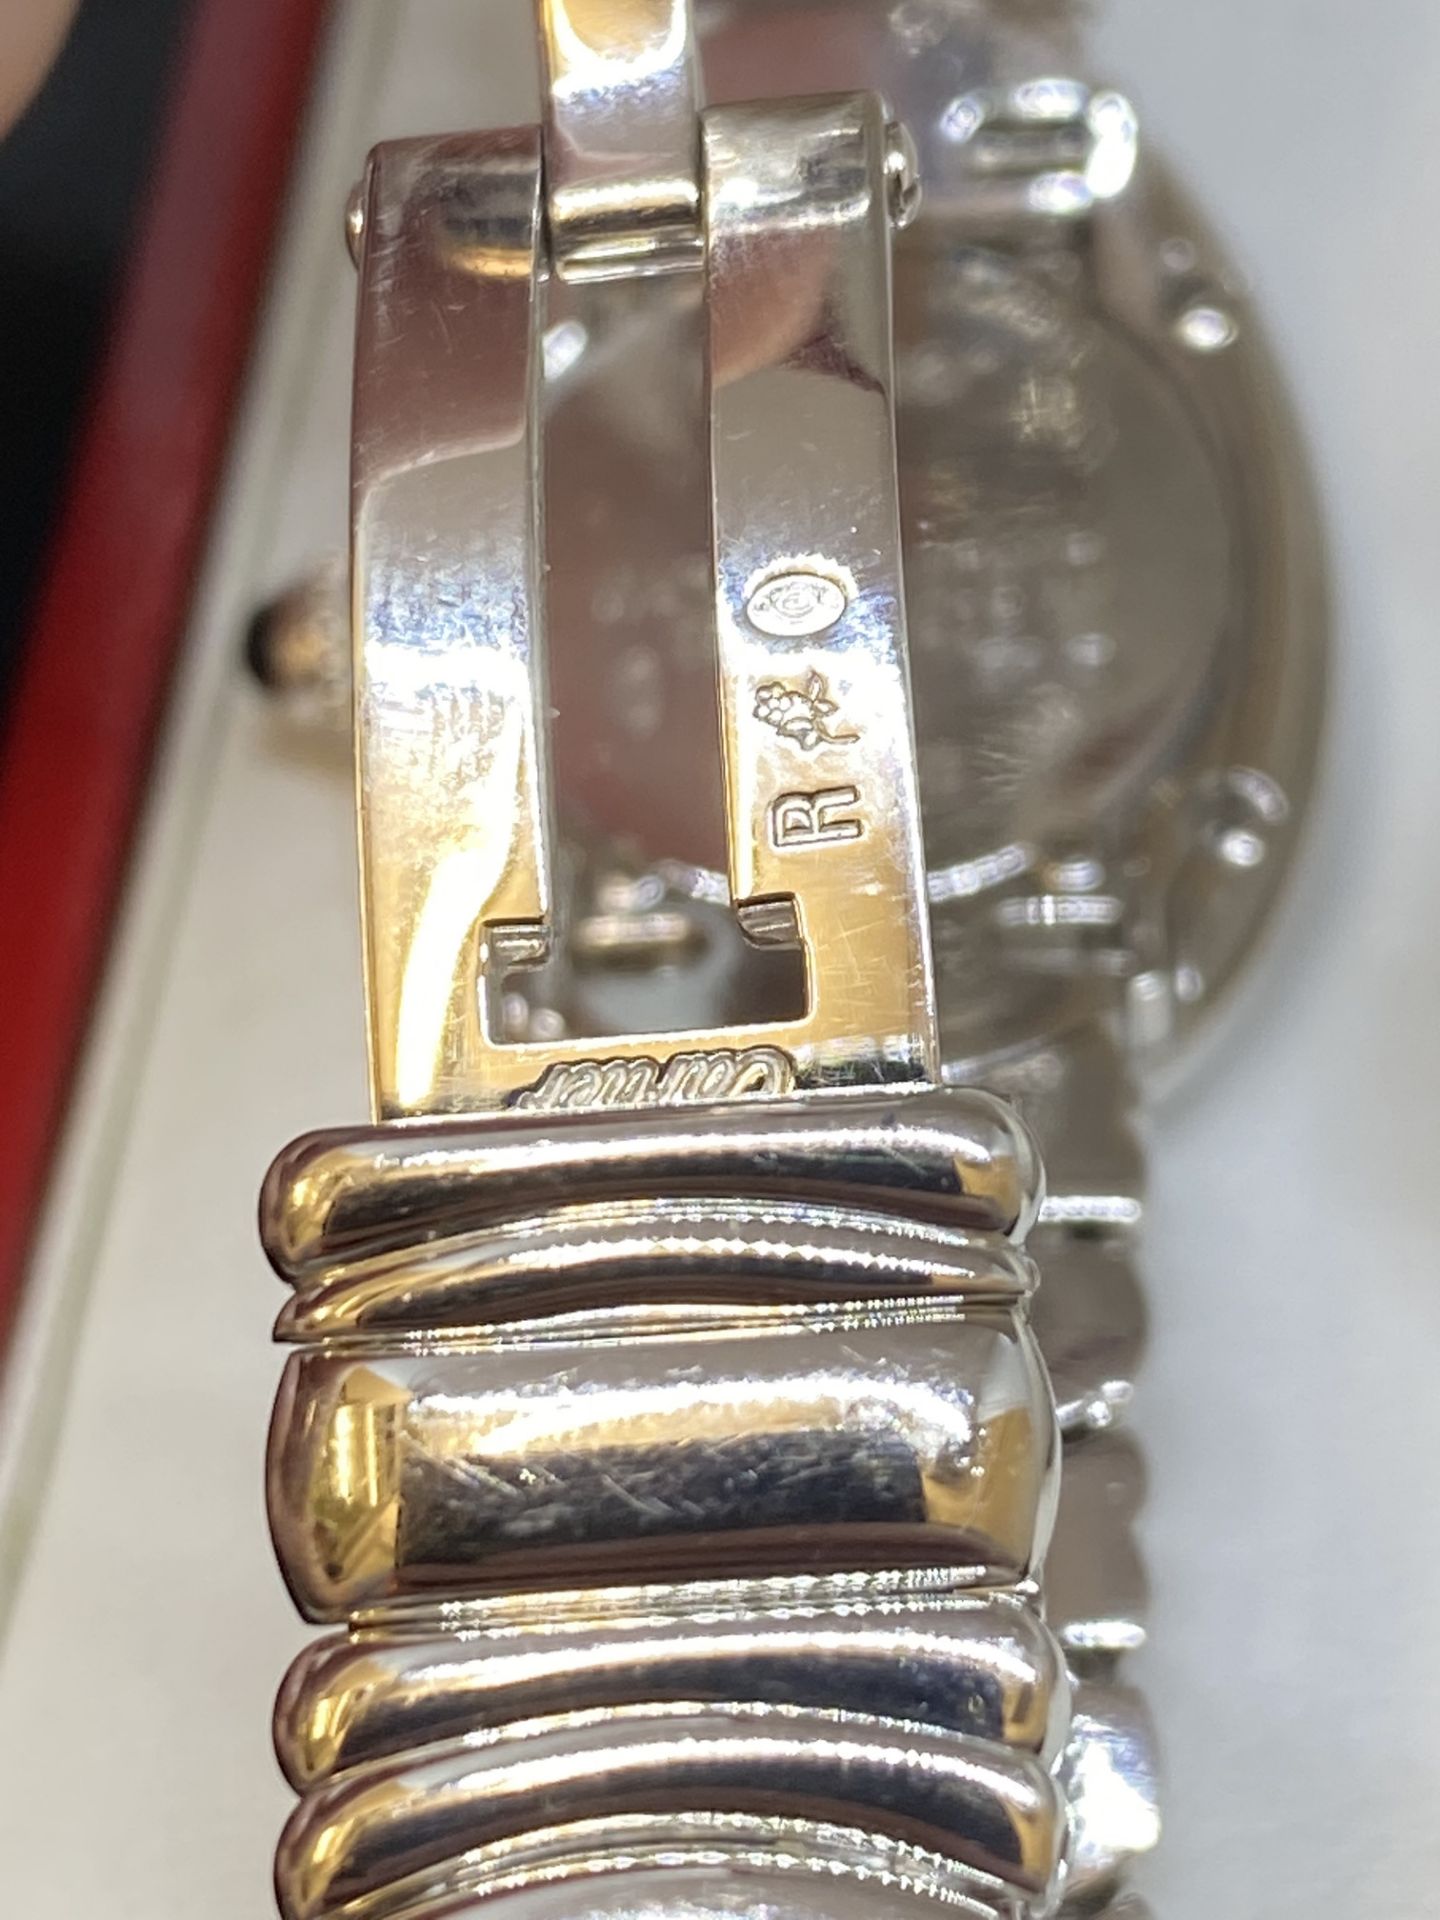 18ct White Gold Cartier Baignoire Mode;: 1955 Watch - Image 13 of 13